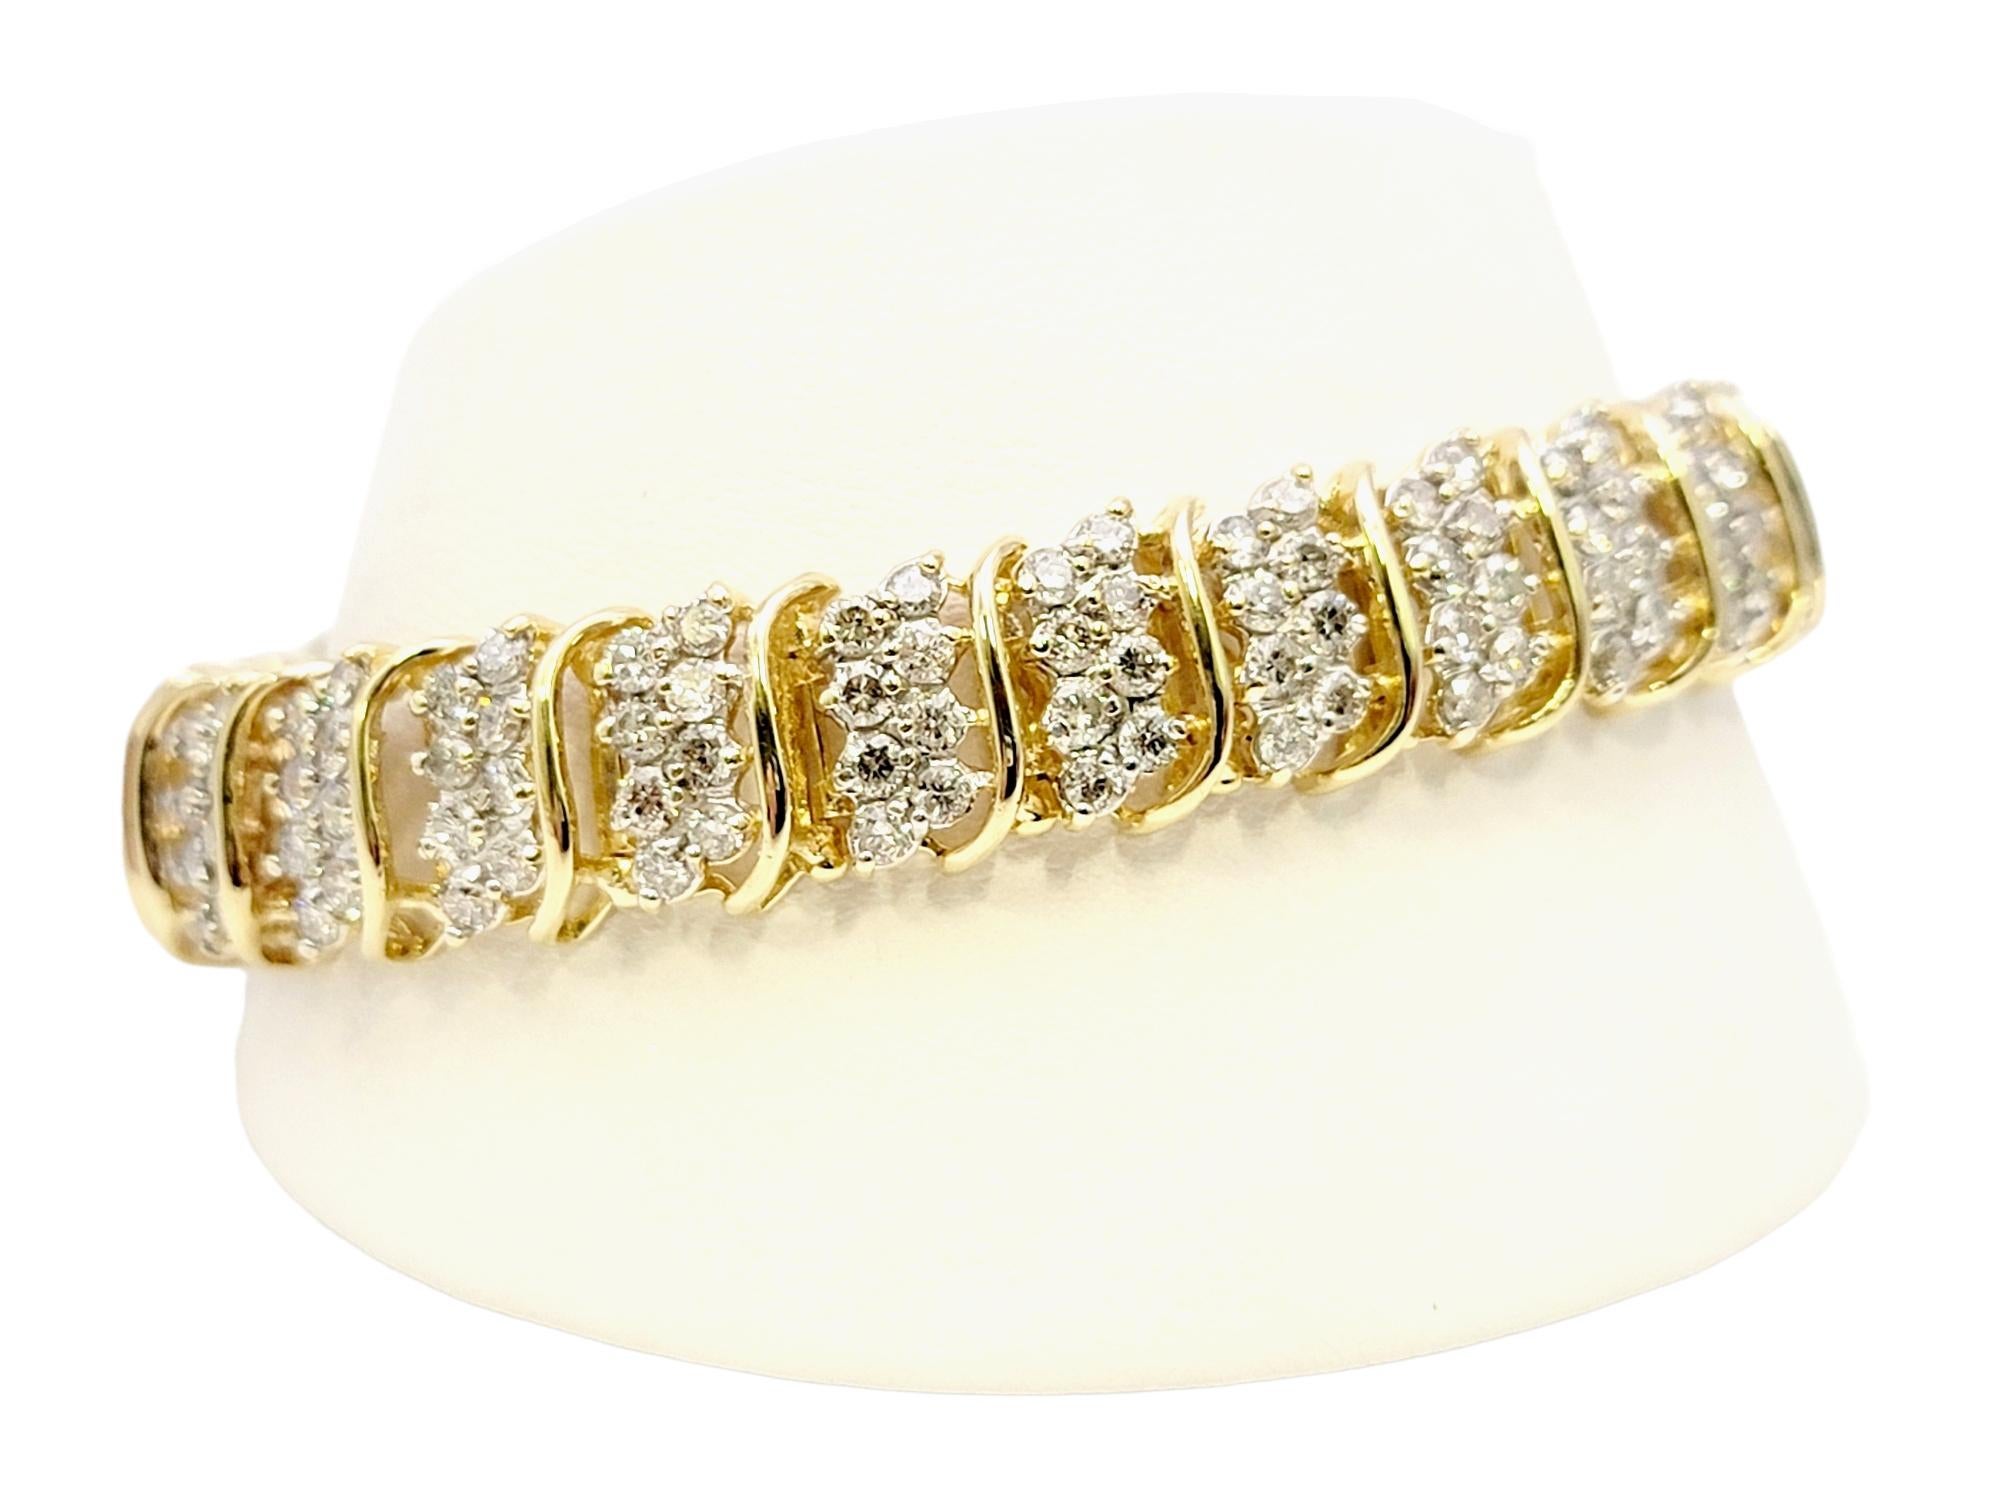 8.81 Carats Total Diamond Cluster 'S' Link Tennis Bracelet in Yellow Gold 6